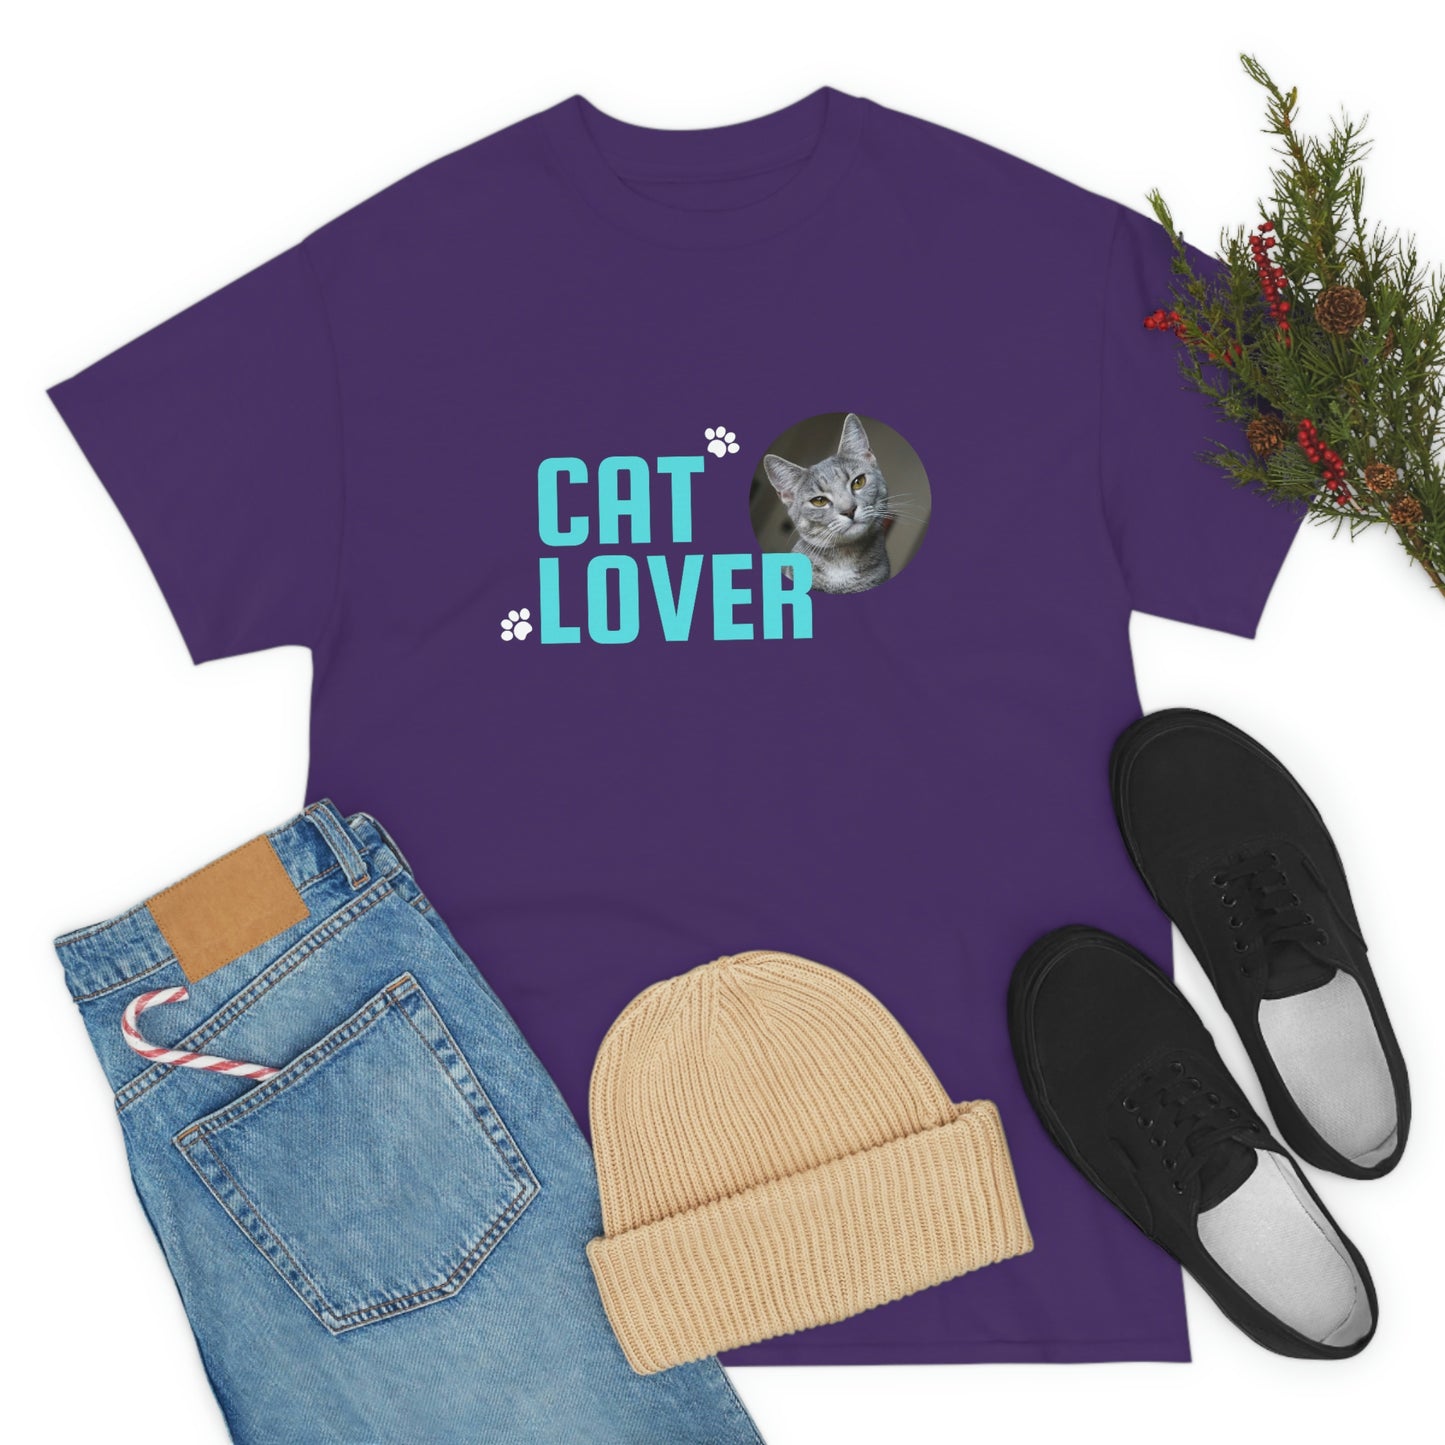 Cat Lover with Paws "Cat Lover" design  Graphic tee shirt